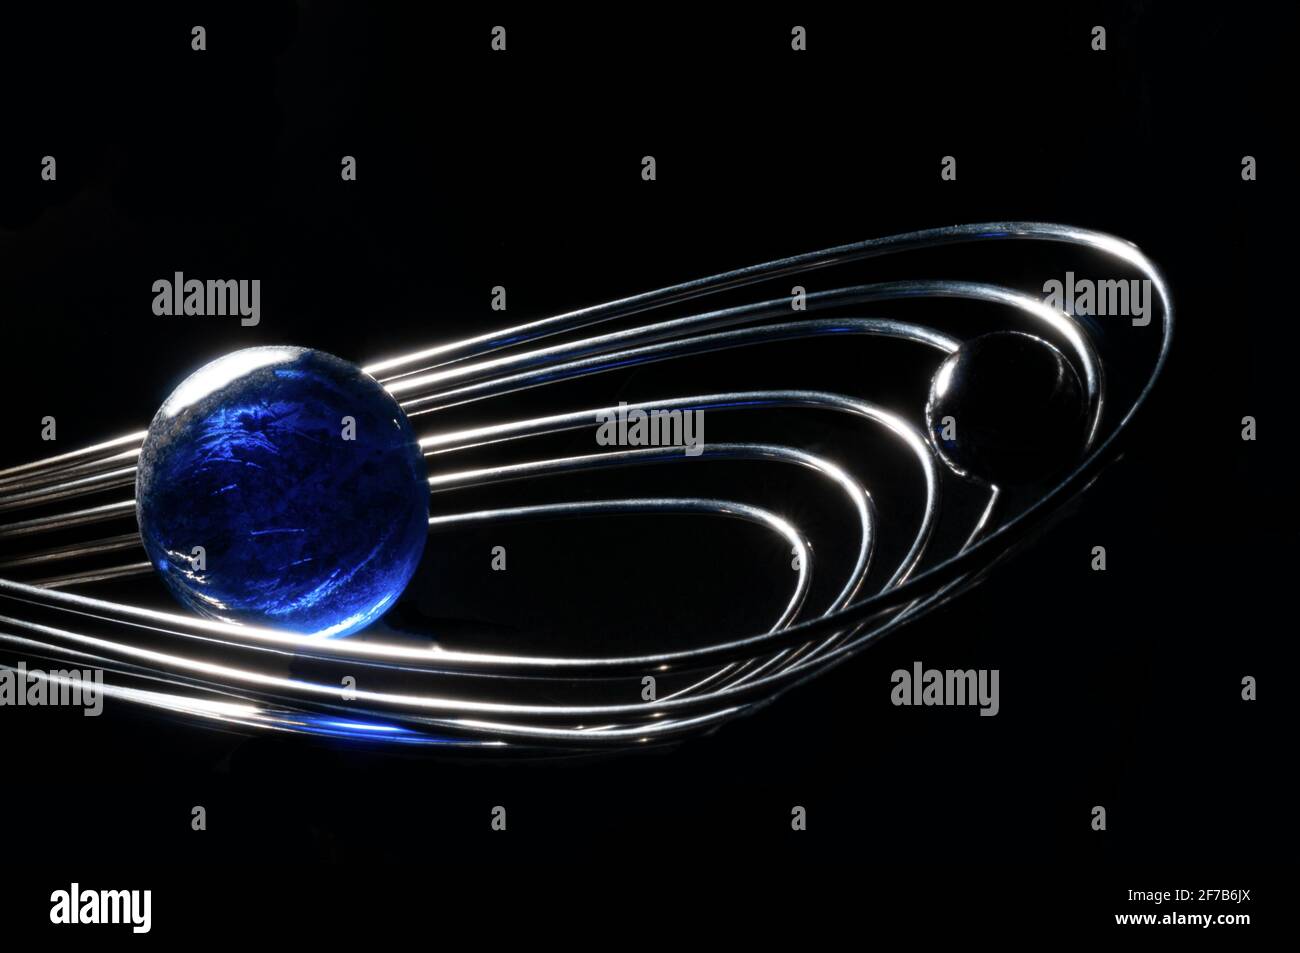 Planetary revolution in the kitchen universe with glass spheres and kitchen whip tool Stock Photo